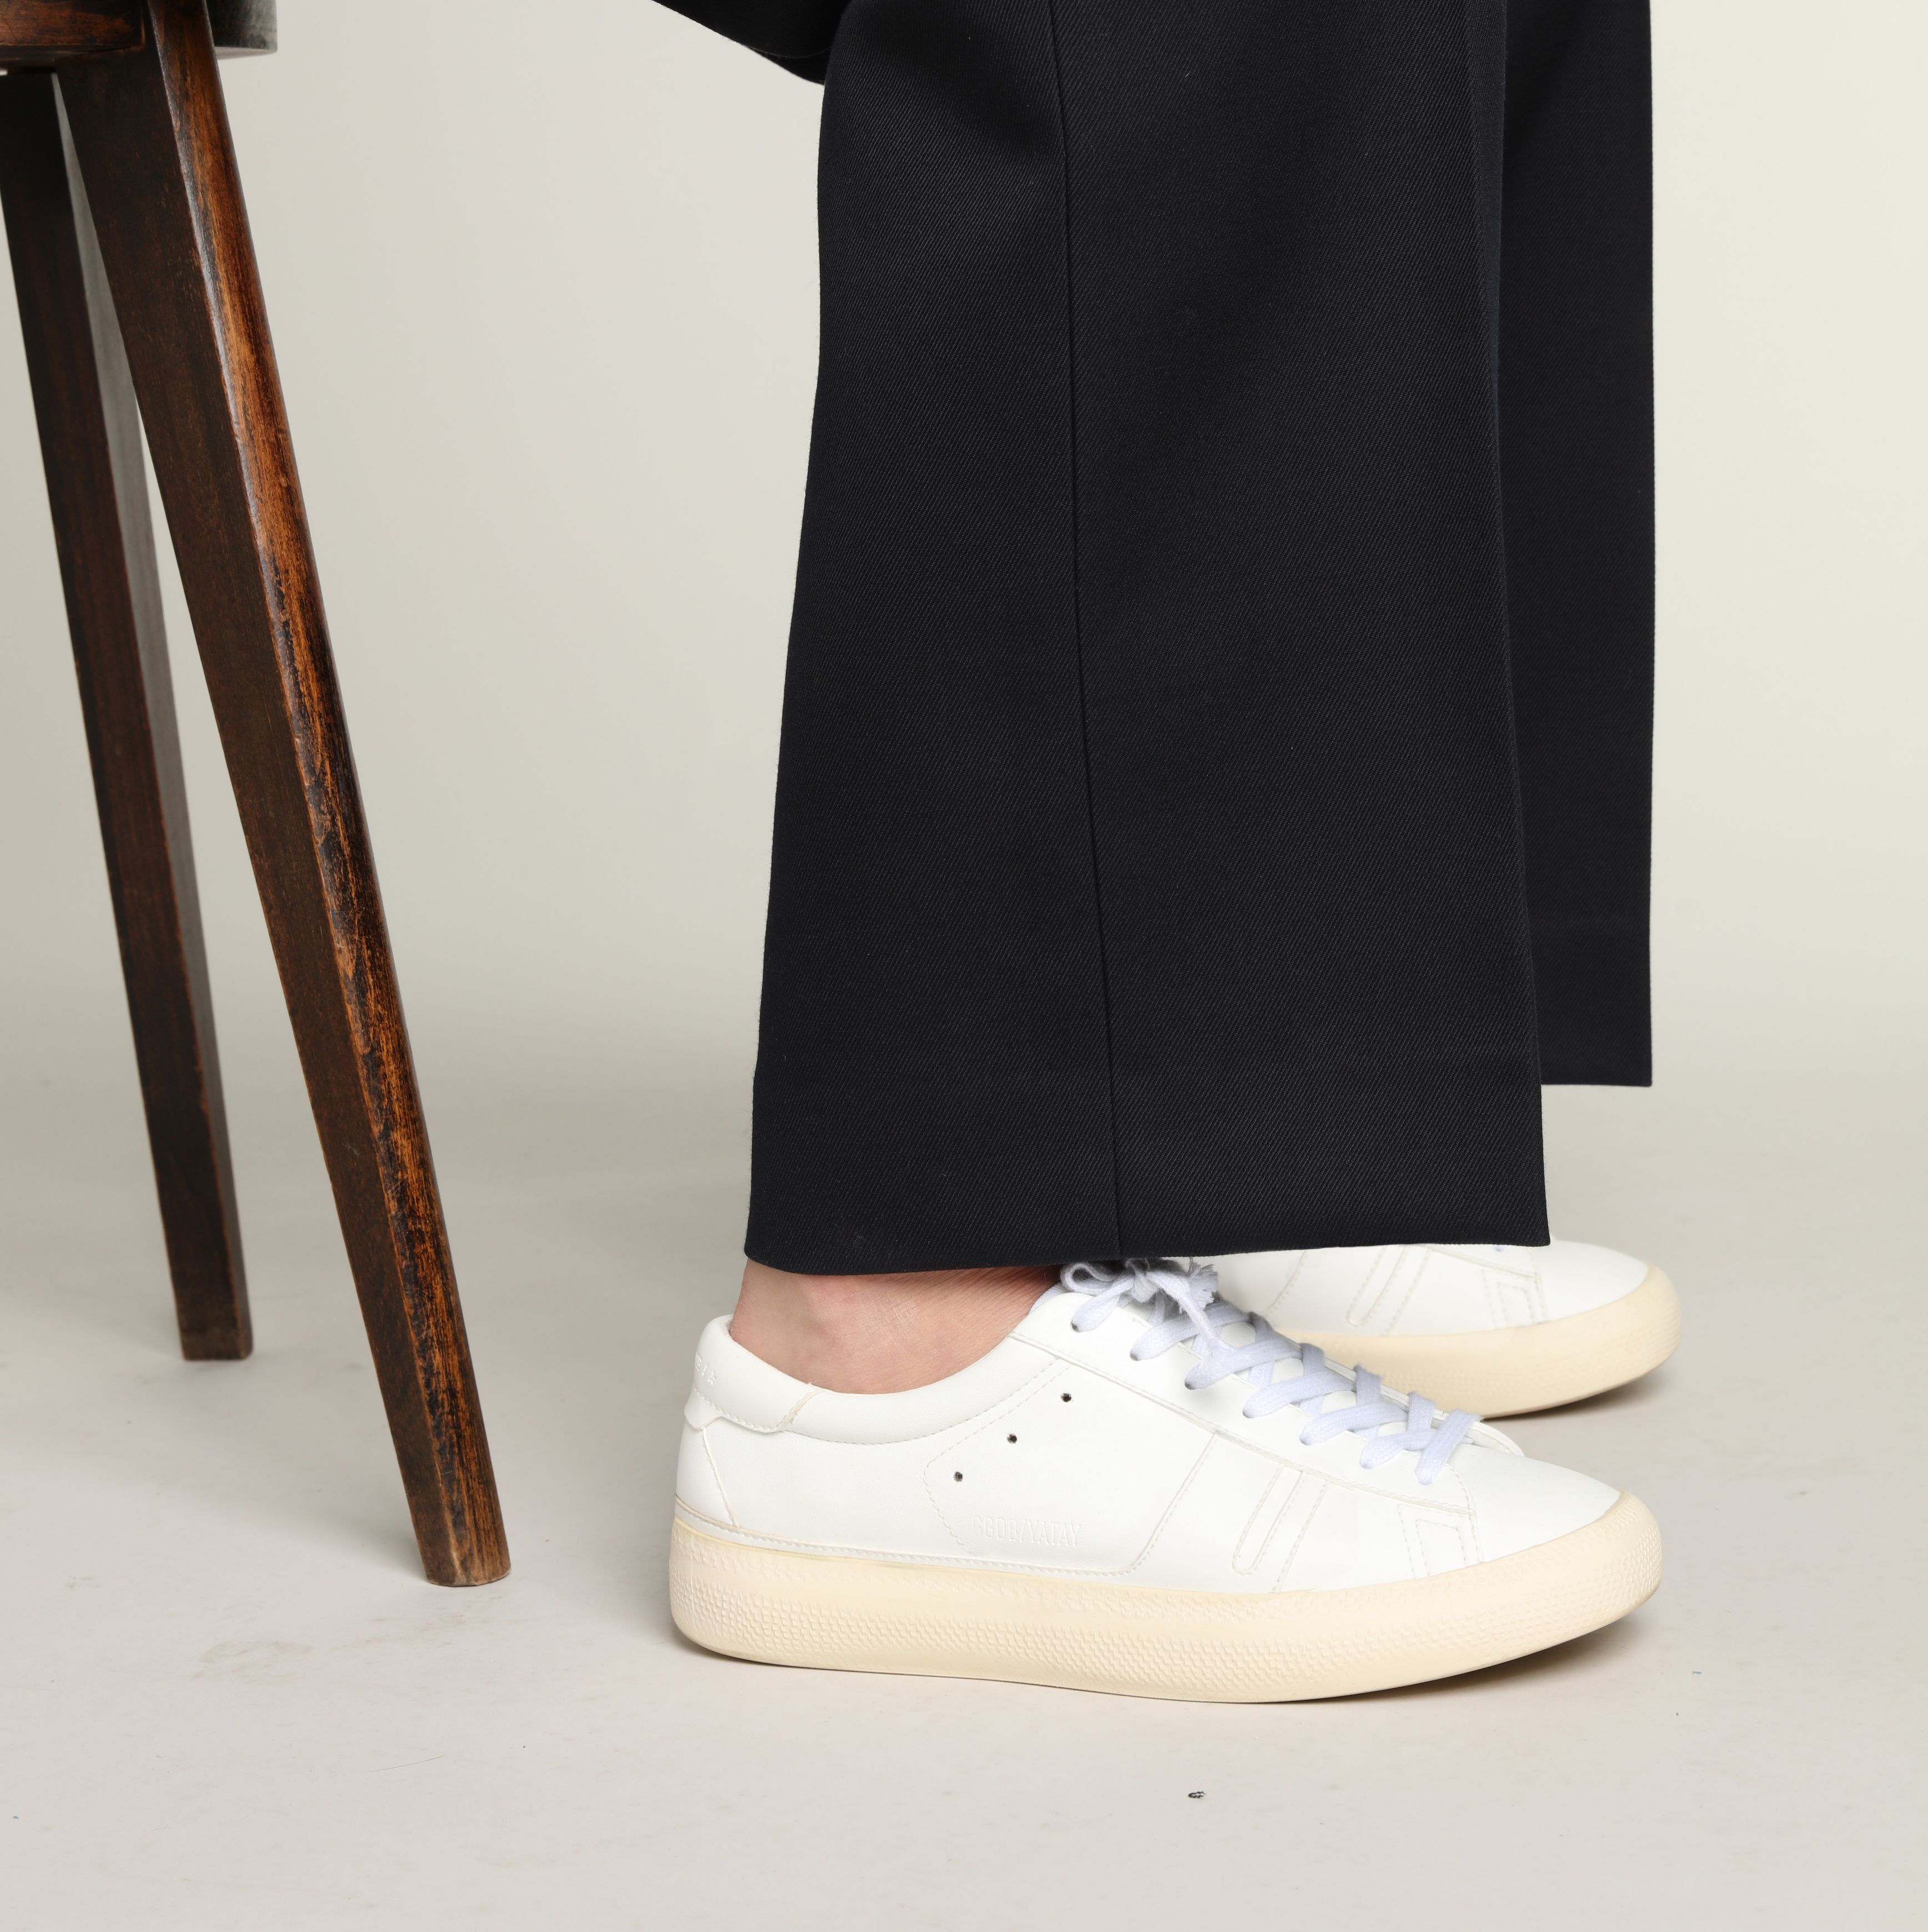 Golden Goose Announces YATAY, a New Sustainable Sneaker and Platform